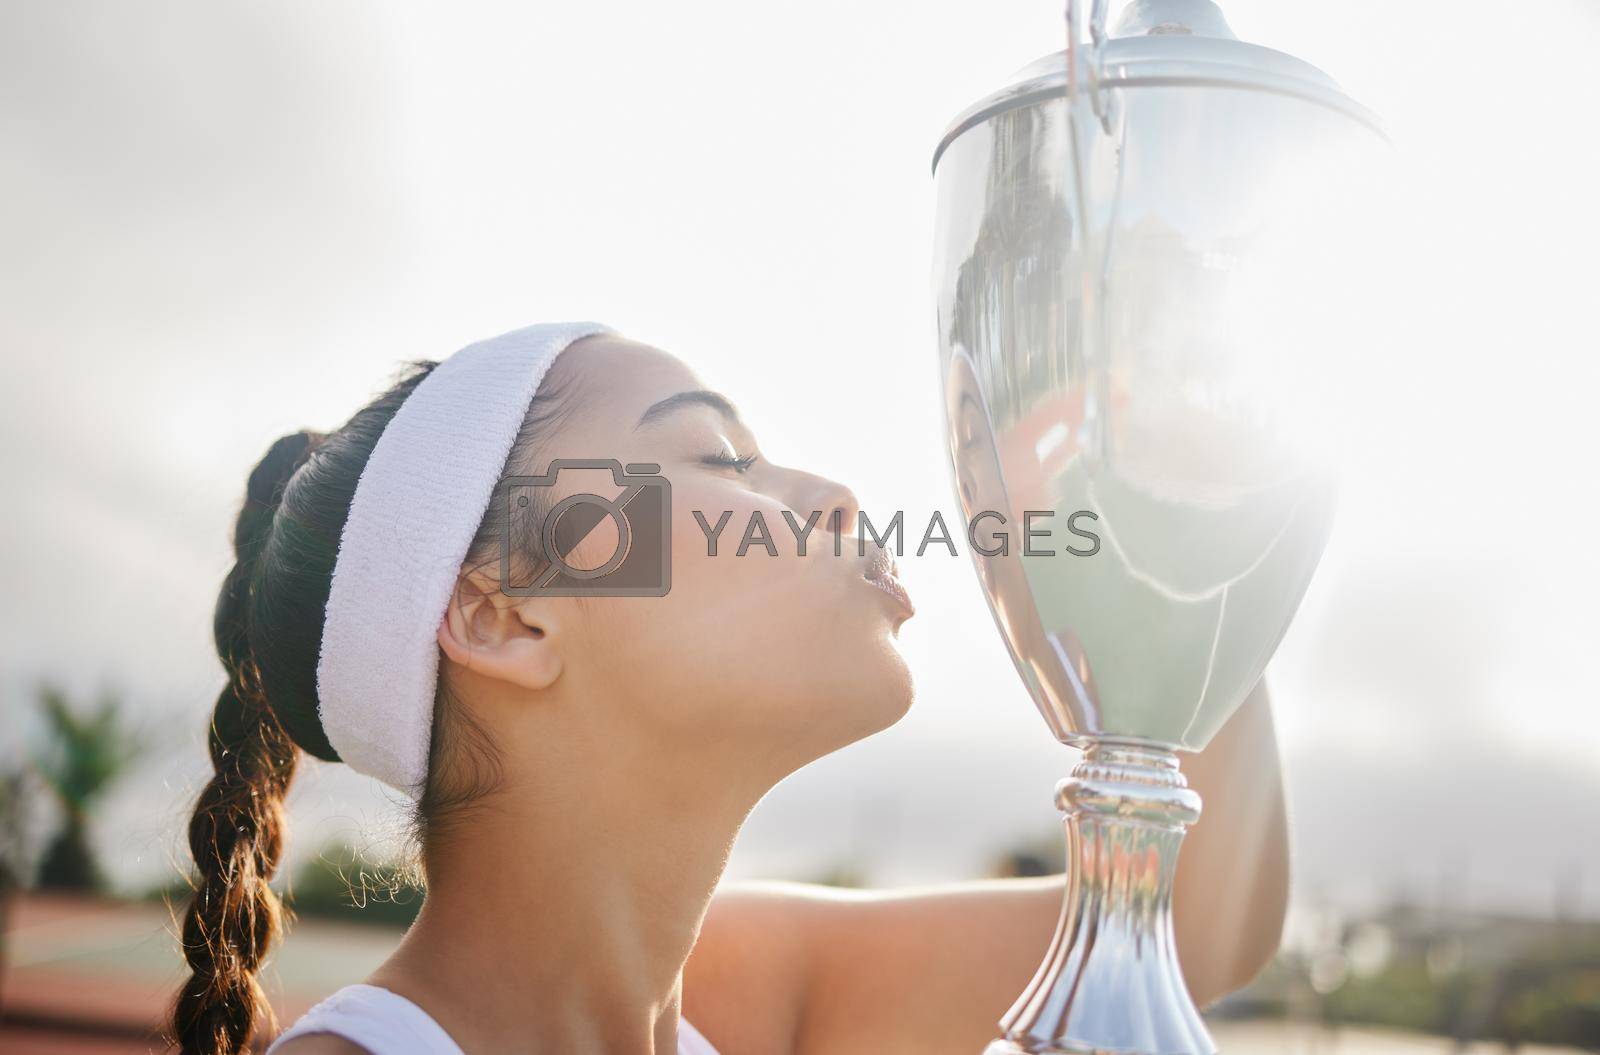 Royalty free image of Winning is a way of expressing yourself. an attractive young tennis player holding up a trophy. by YuriArcurs